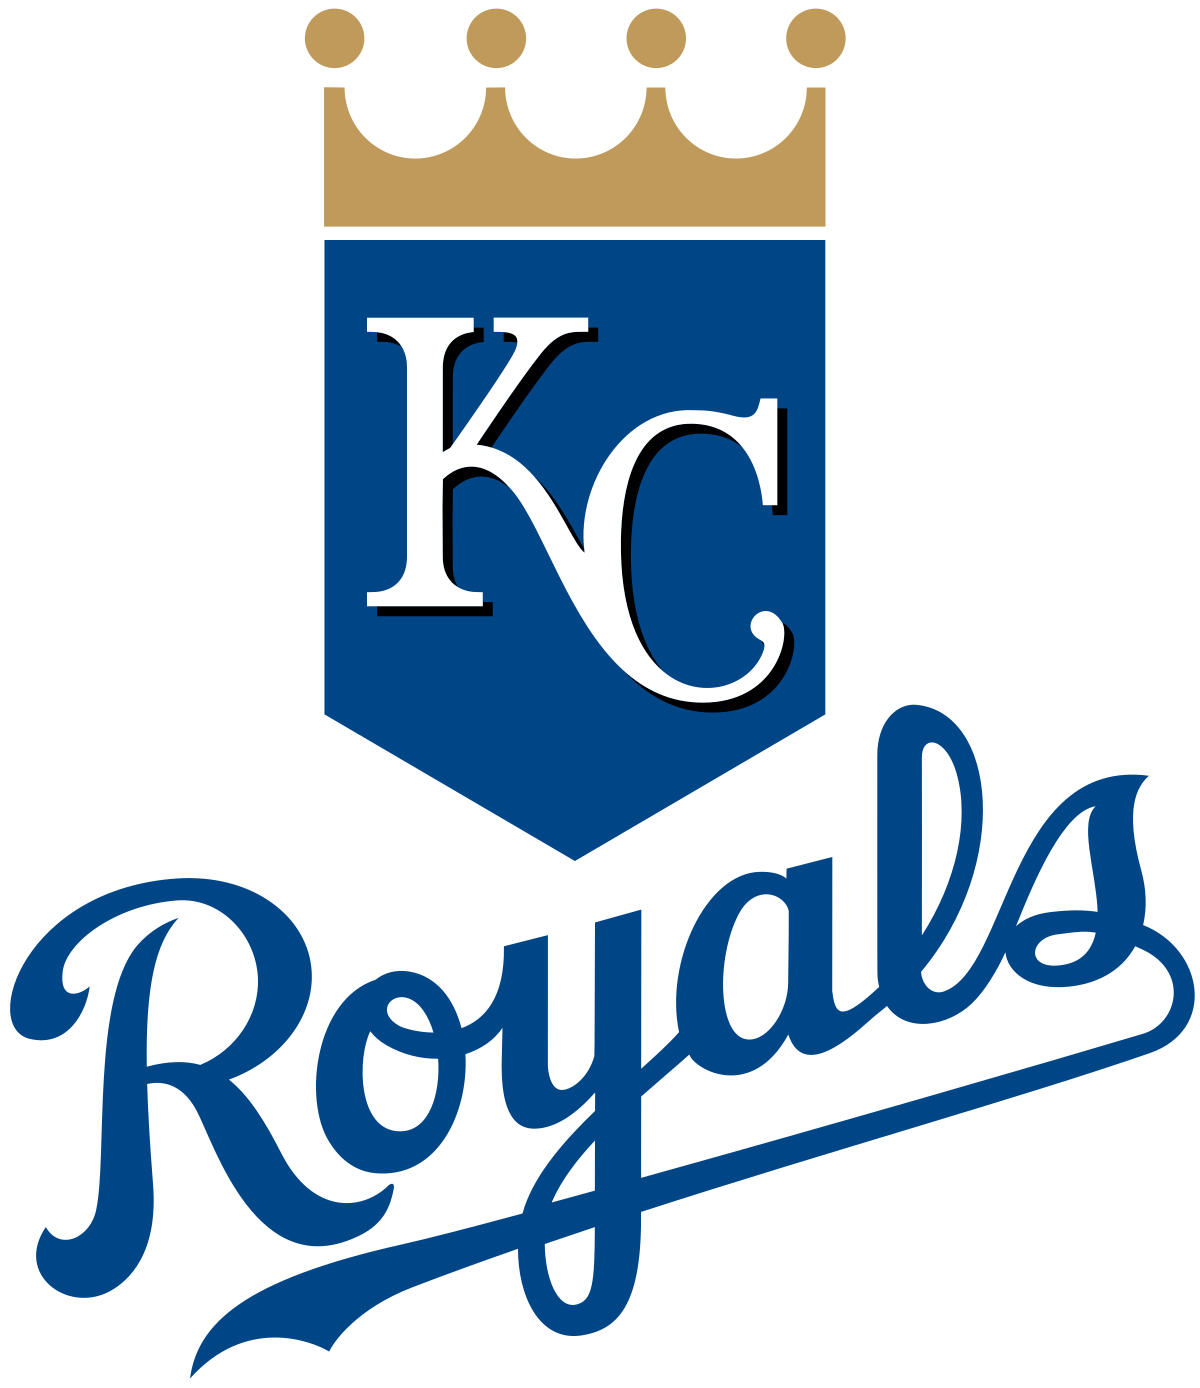 KC native and propane indusrtry mega entrepreneur John Sherman and group purchase the Kansas City Royals baseball team reports Butane-Propane News (BPN) the propane industry's leading source for news and information since 1939 LPG